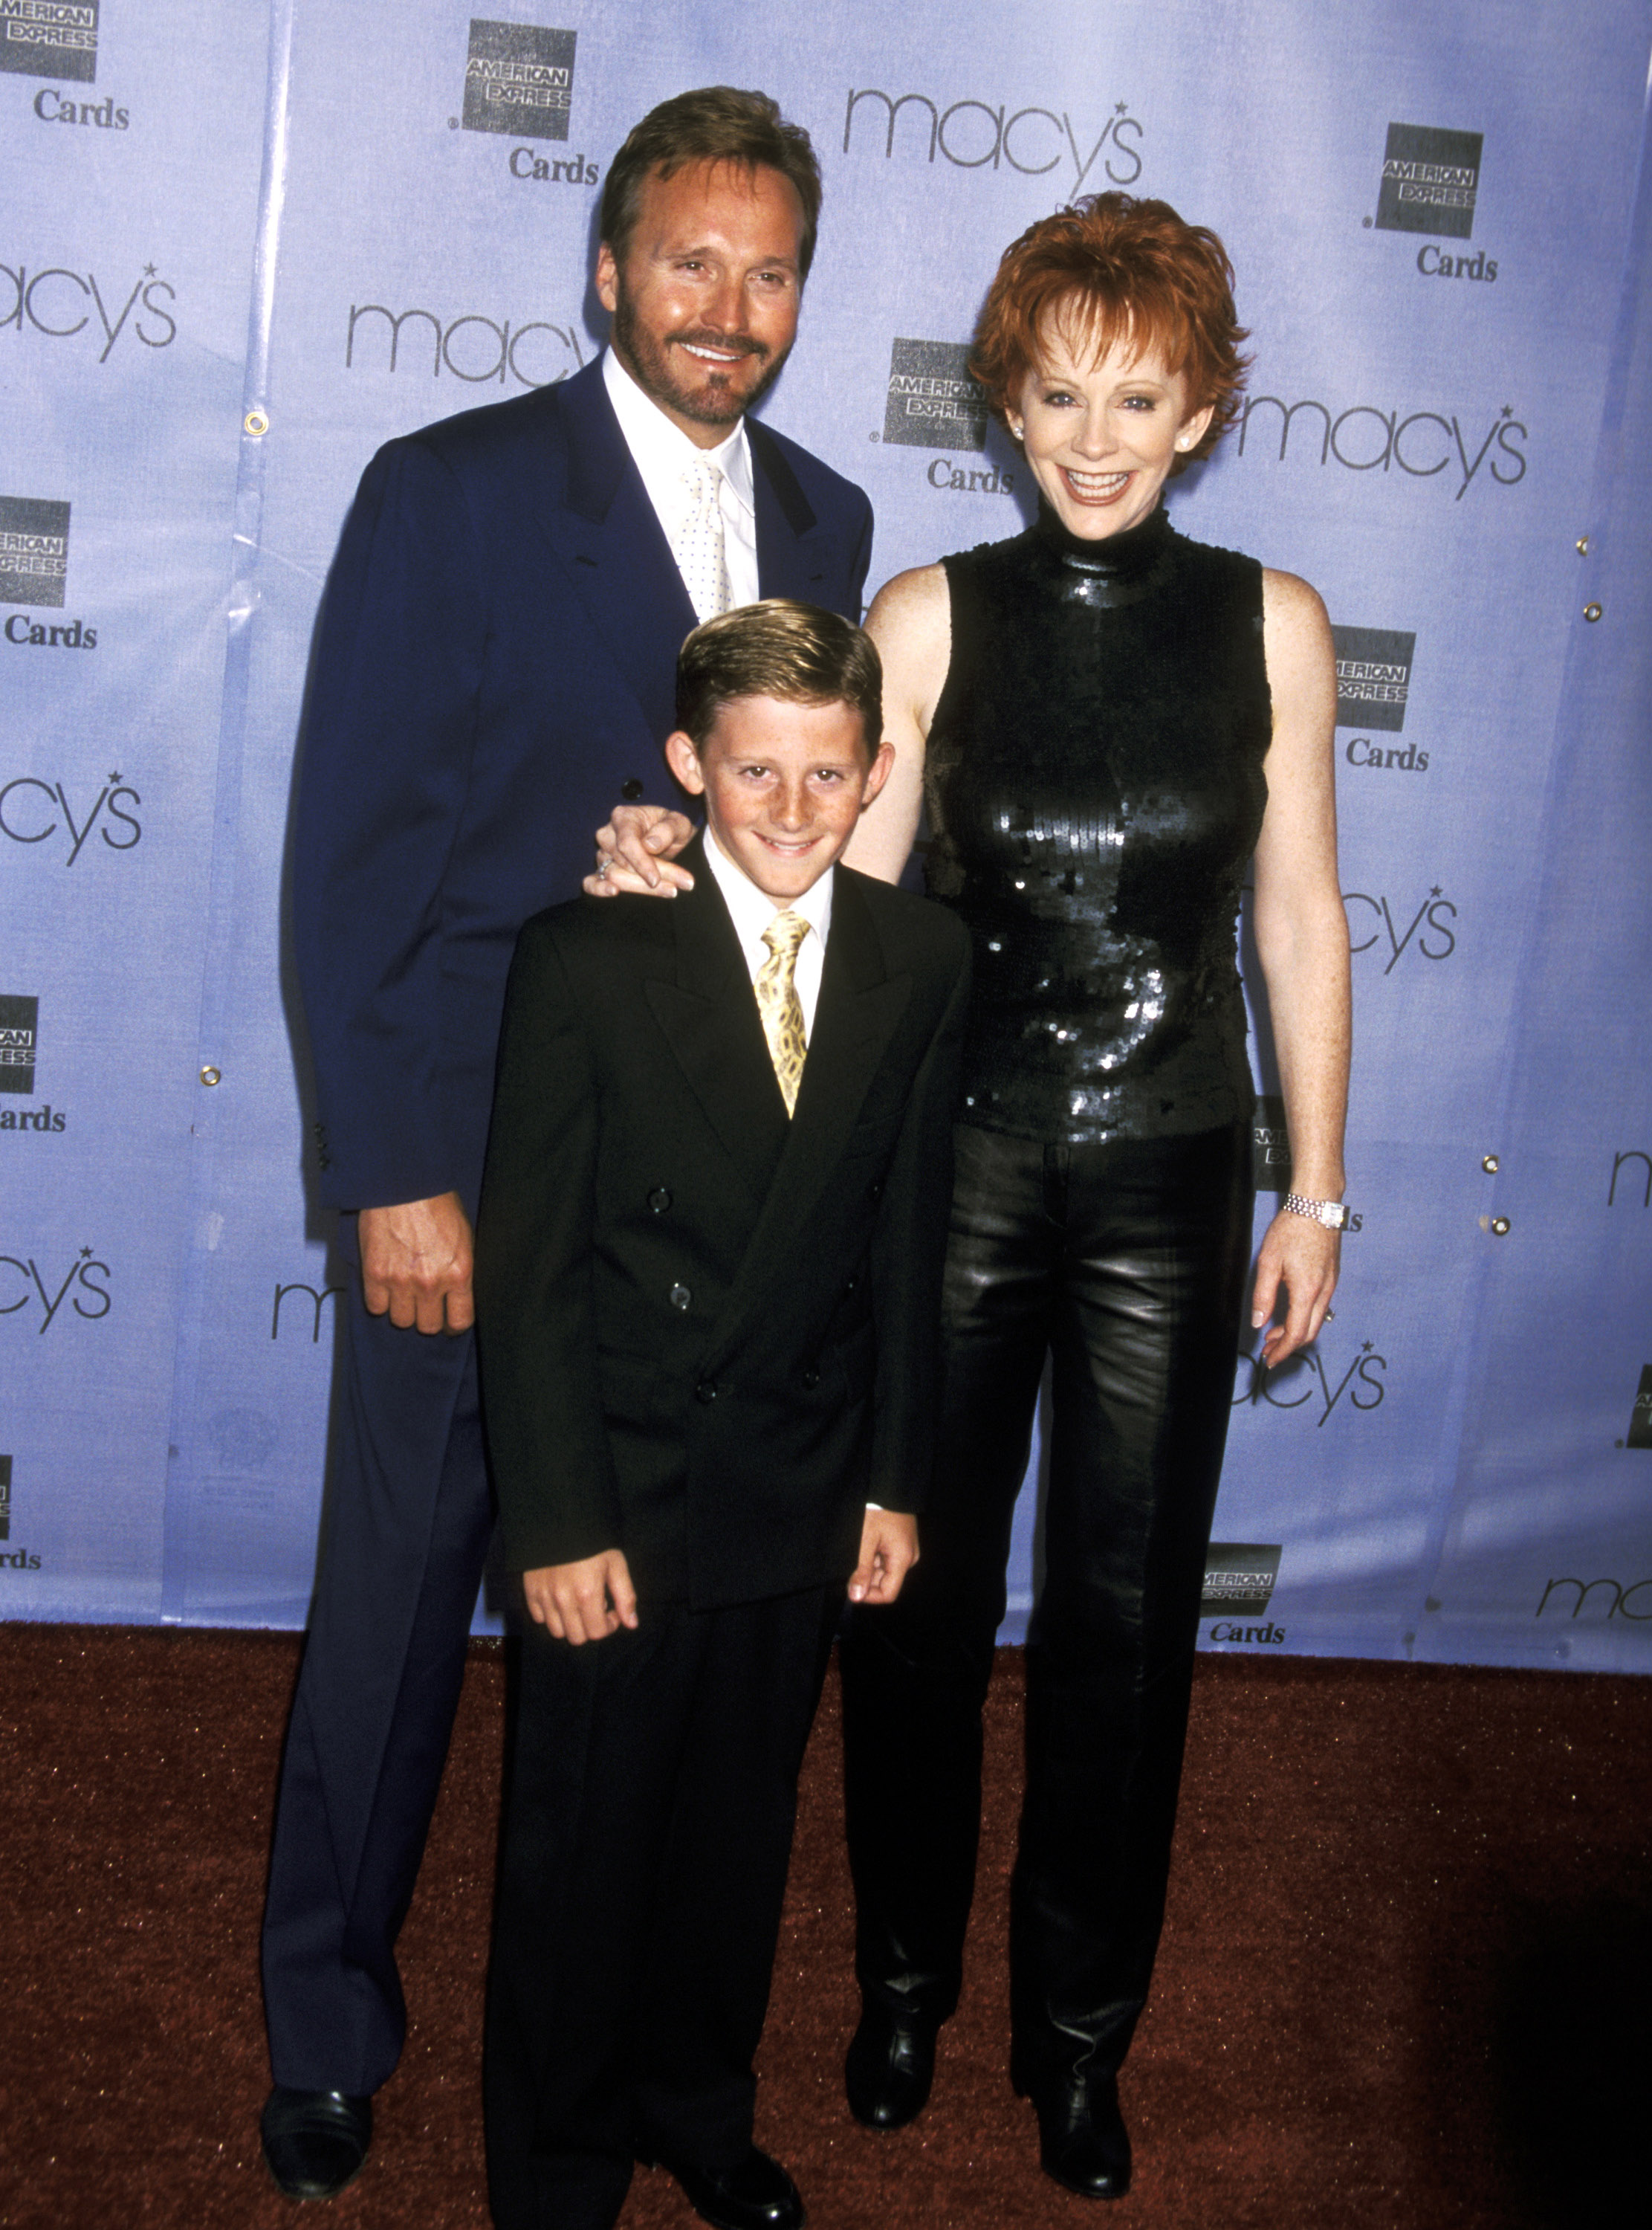 Narvel Blackstock, Reba McEntire, and Shelby Blackstock at the Passport '01 20 Years of AIDS, 20 Years of Hope event in 2001 | Source: Getty Images